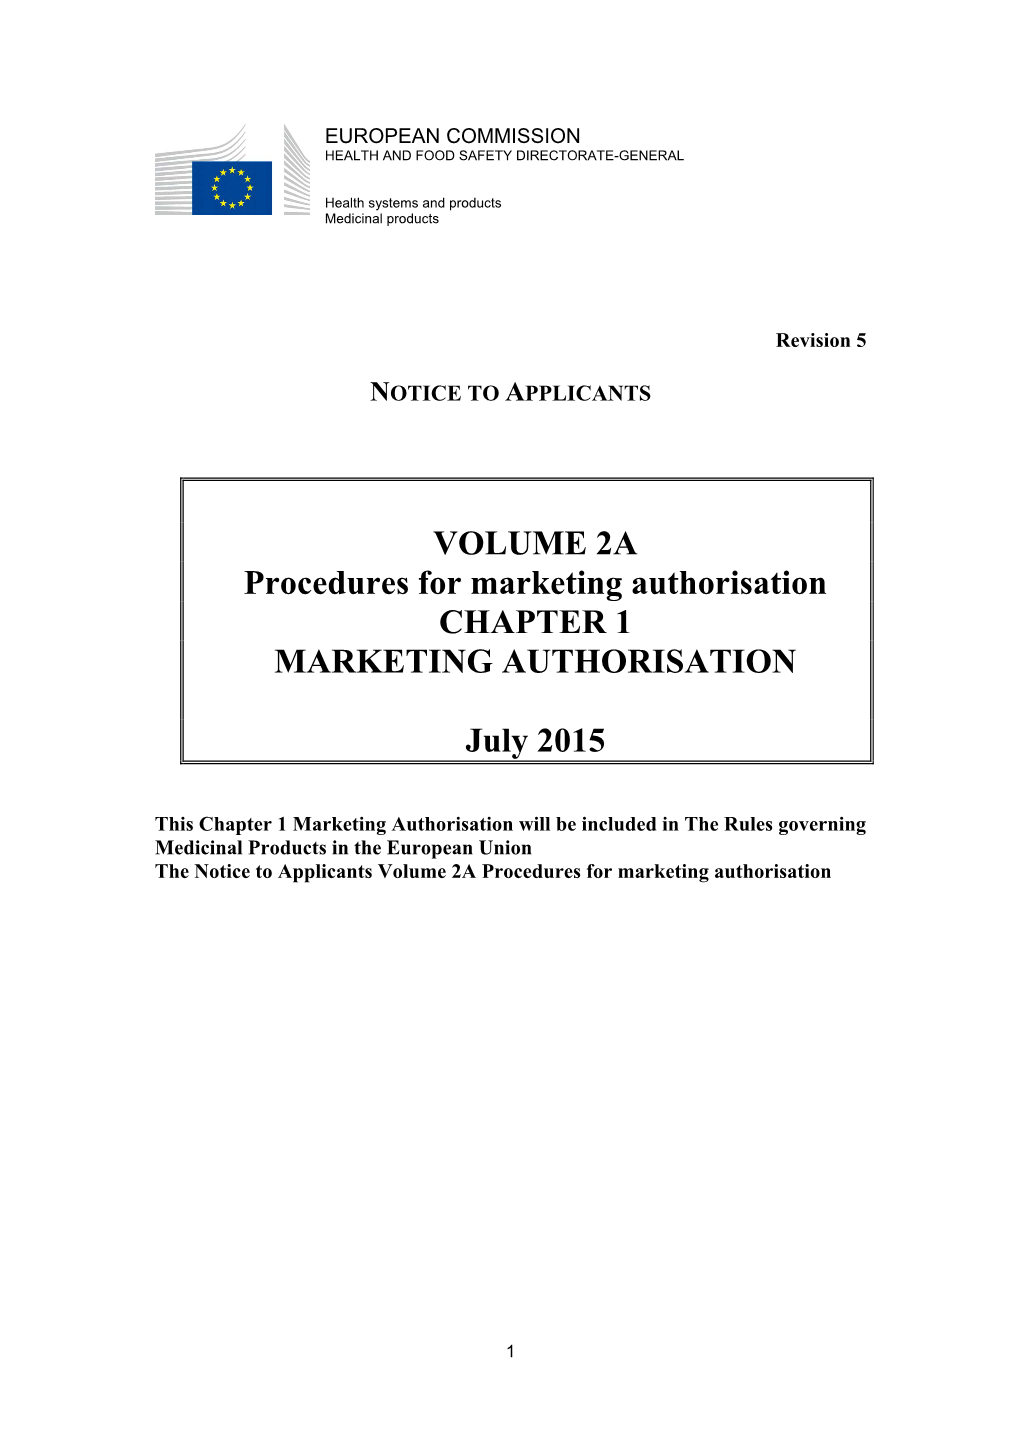 Procedures for Marketing Authorisation CHAPTER 1 MARKETING AUTHORISATION